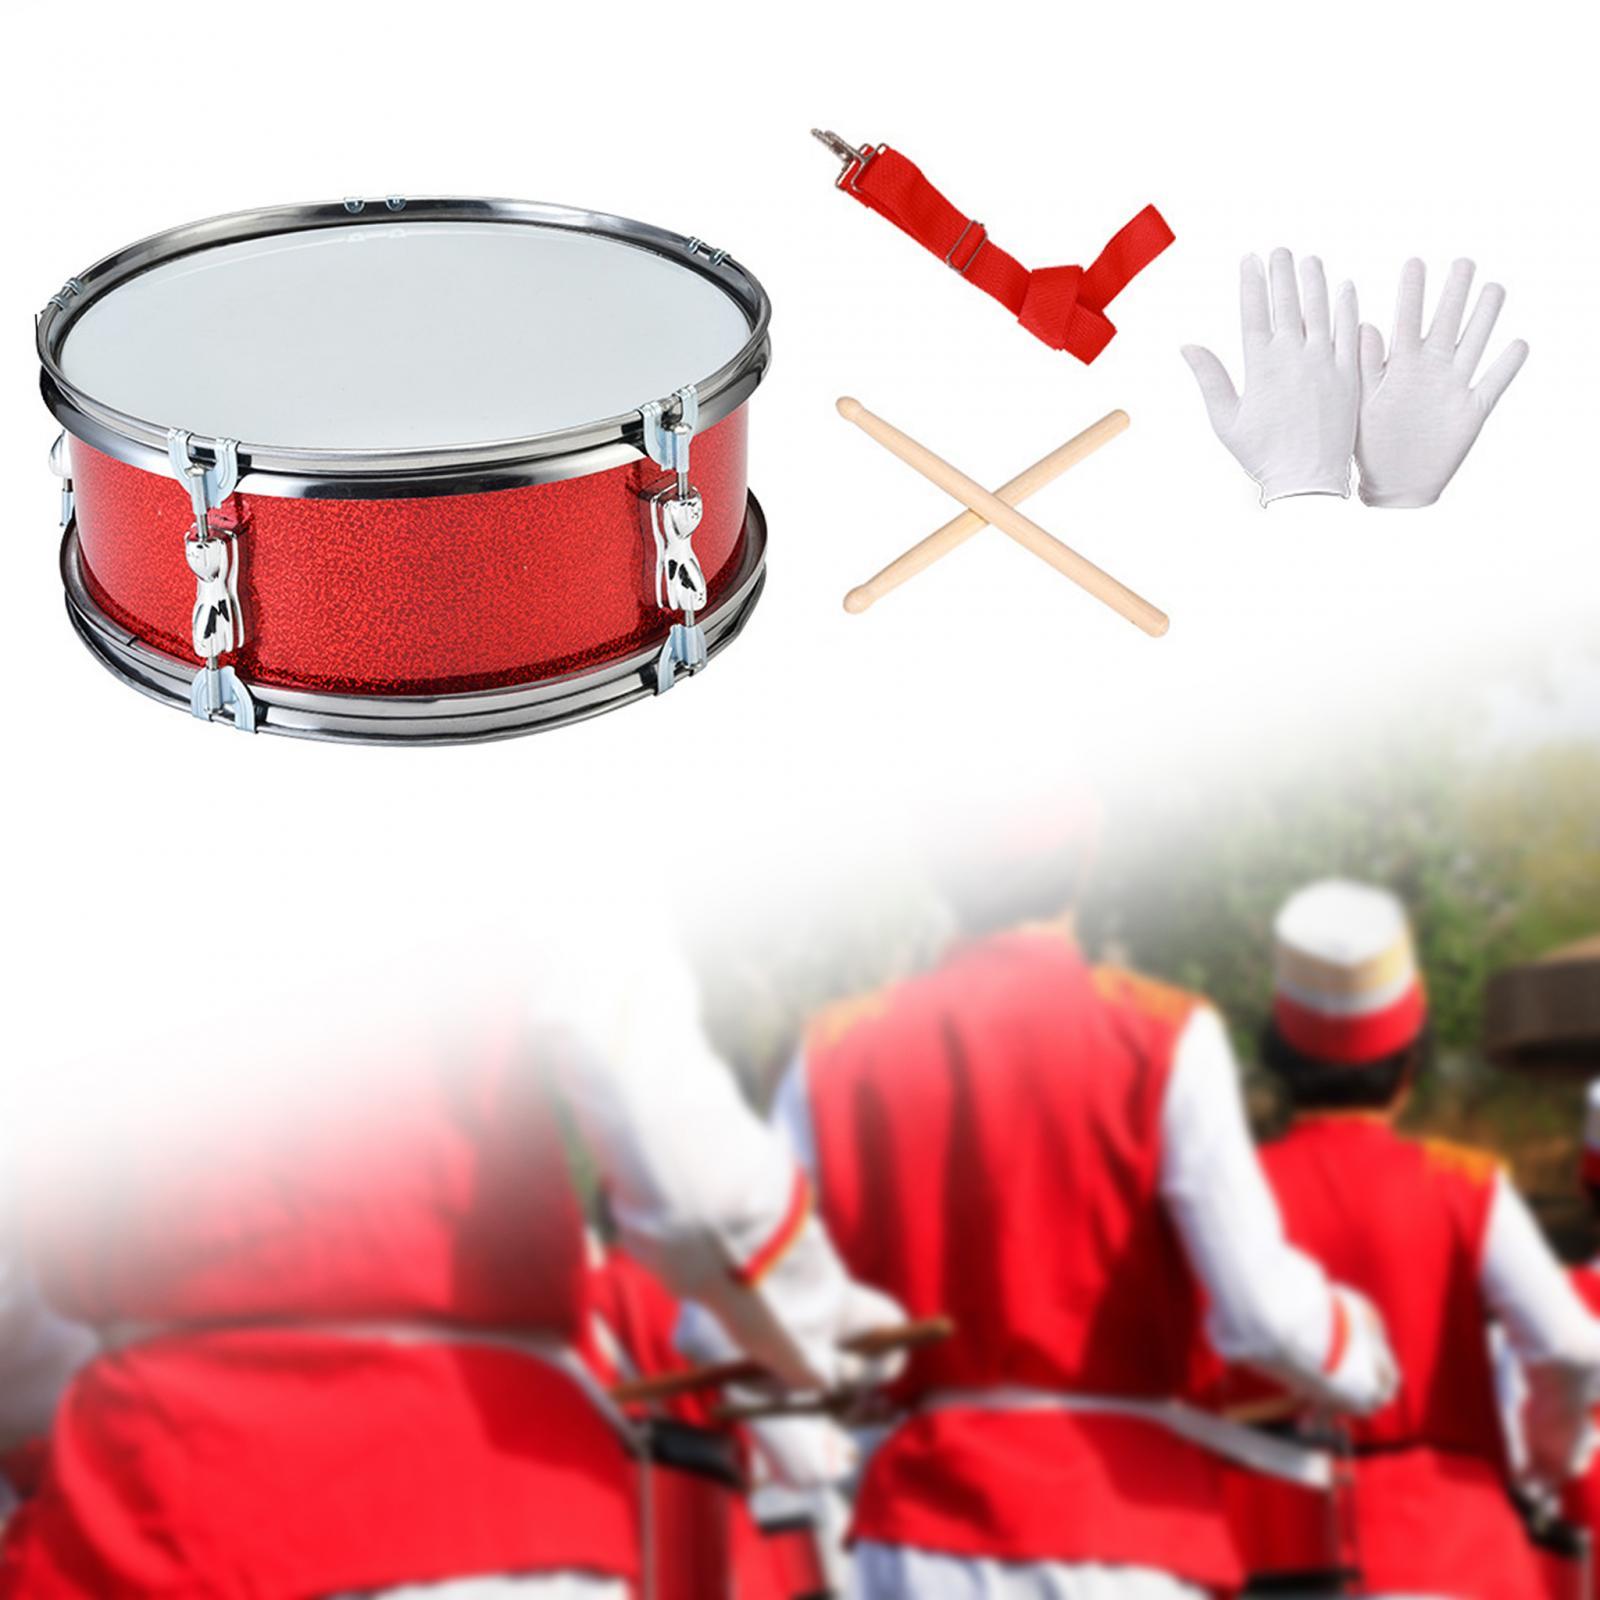 Baoblaze 13inch Snare Drum Educational Toy Music Drums for Kids Beginners